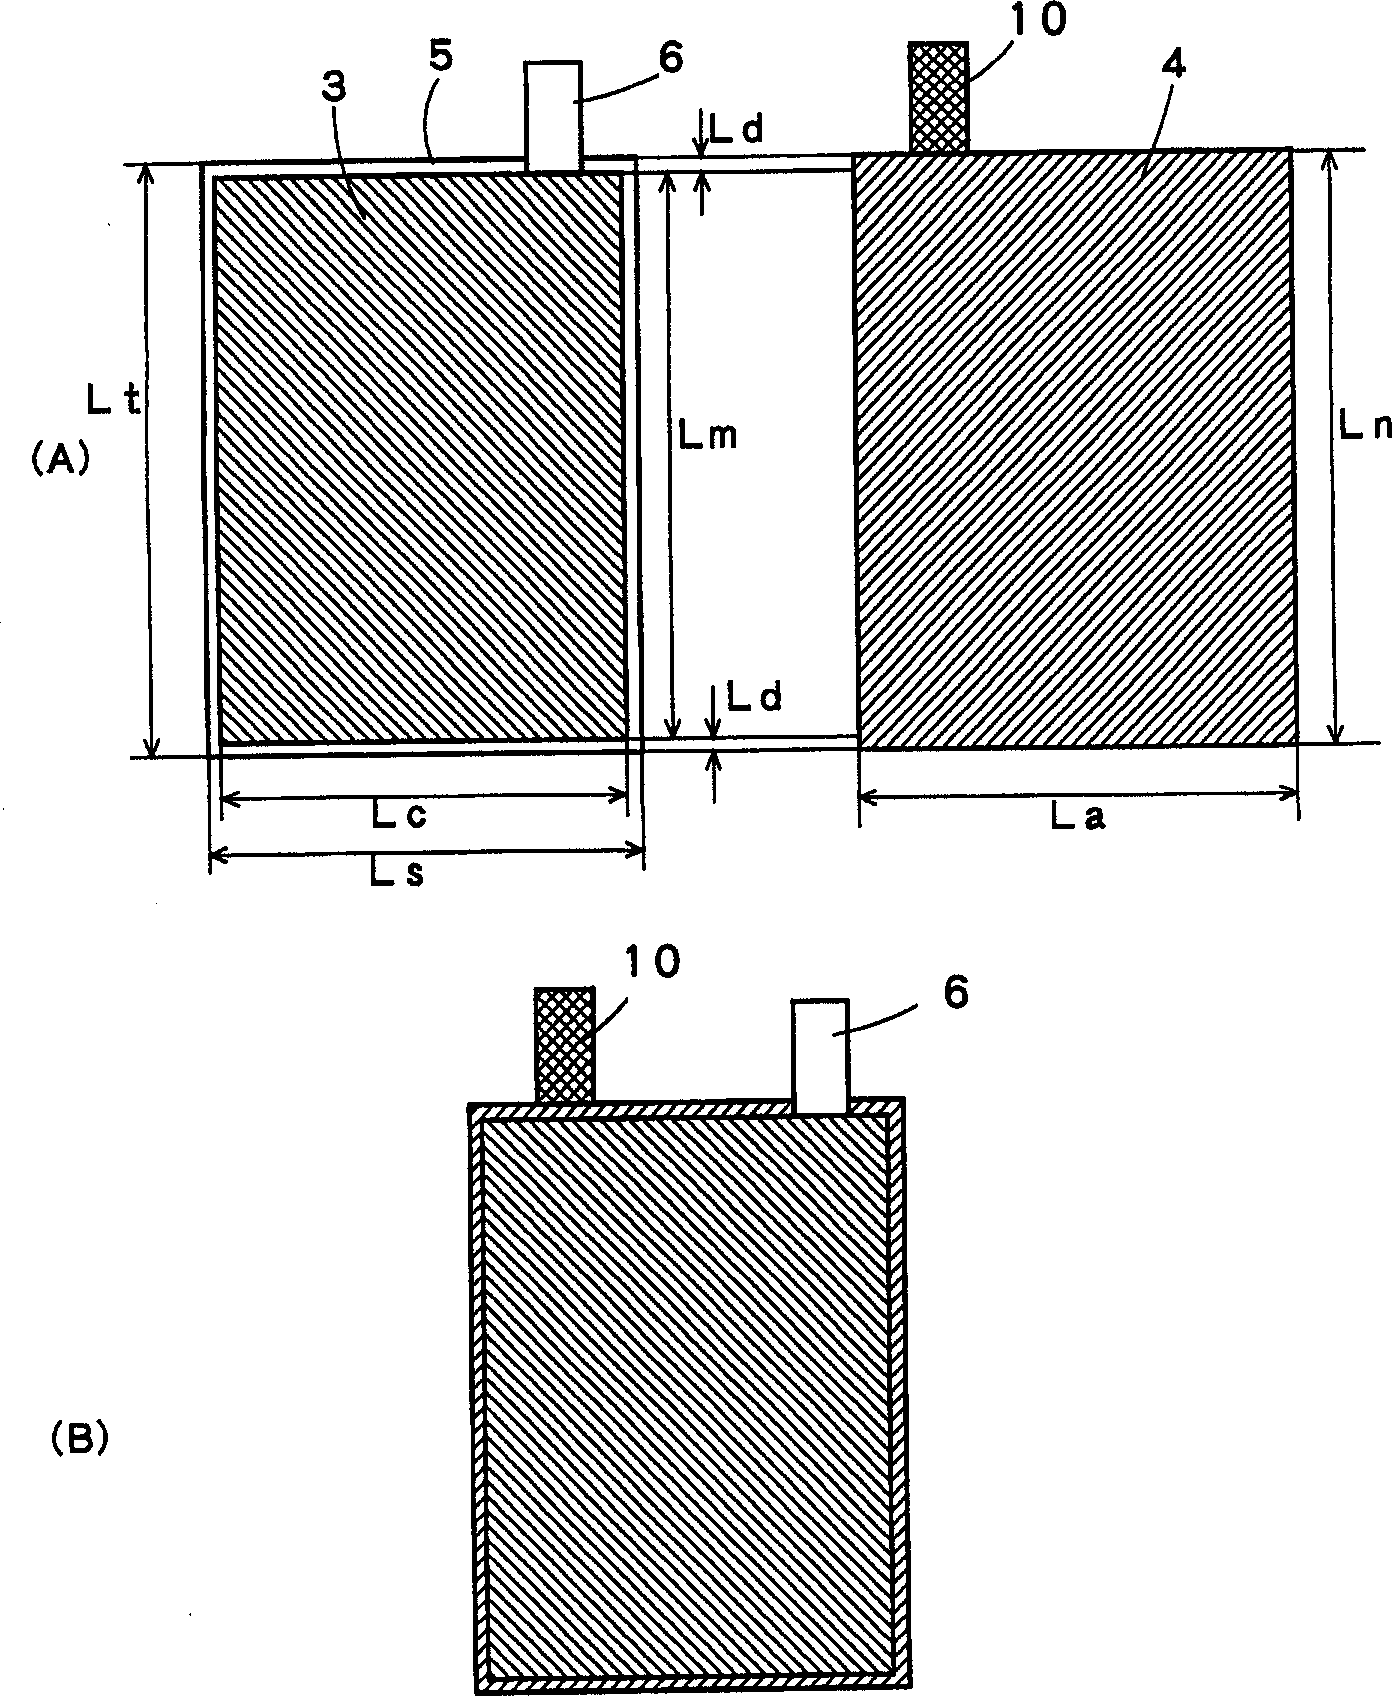 Laminated secondary cell